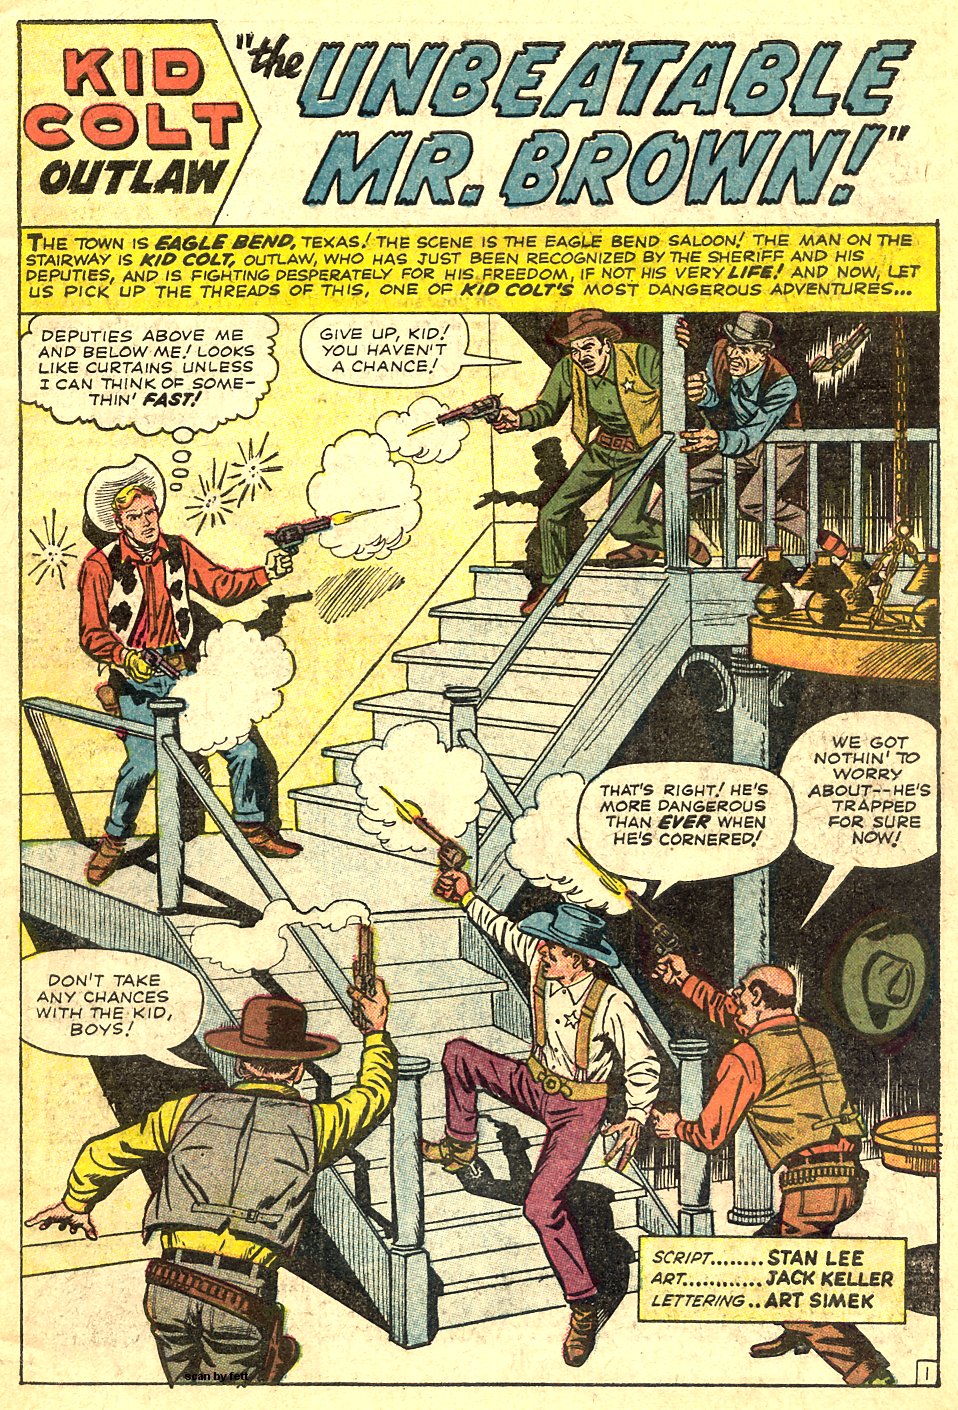 Read online Kid Colt Outlaw comic -  Issue #112 - 3